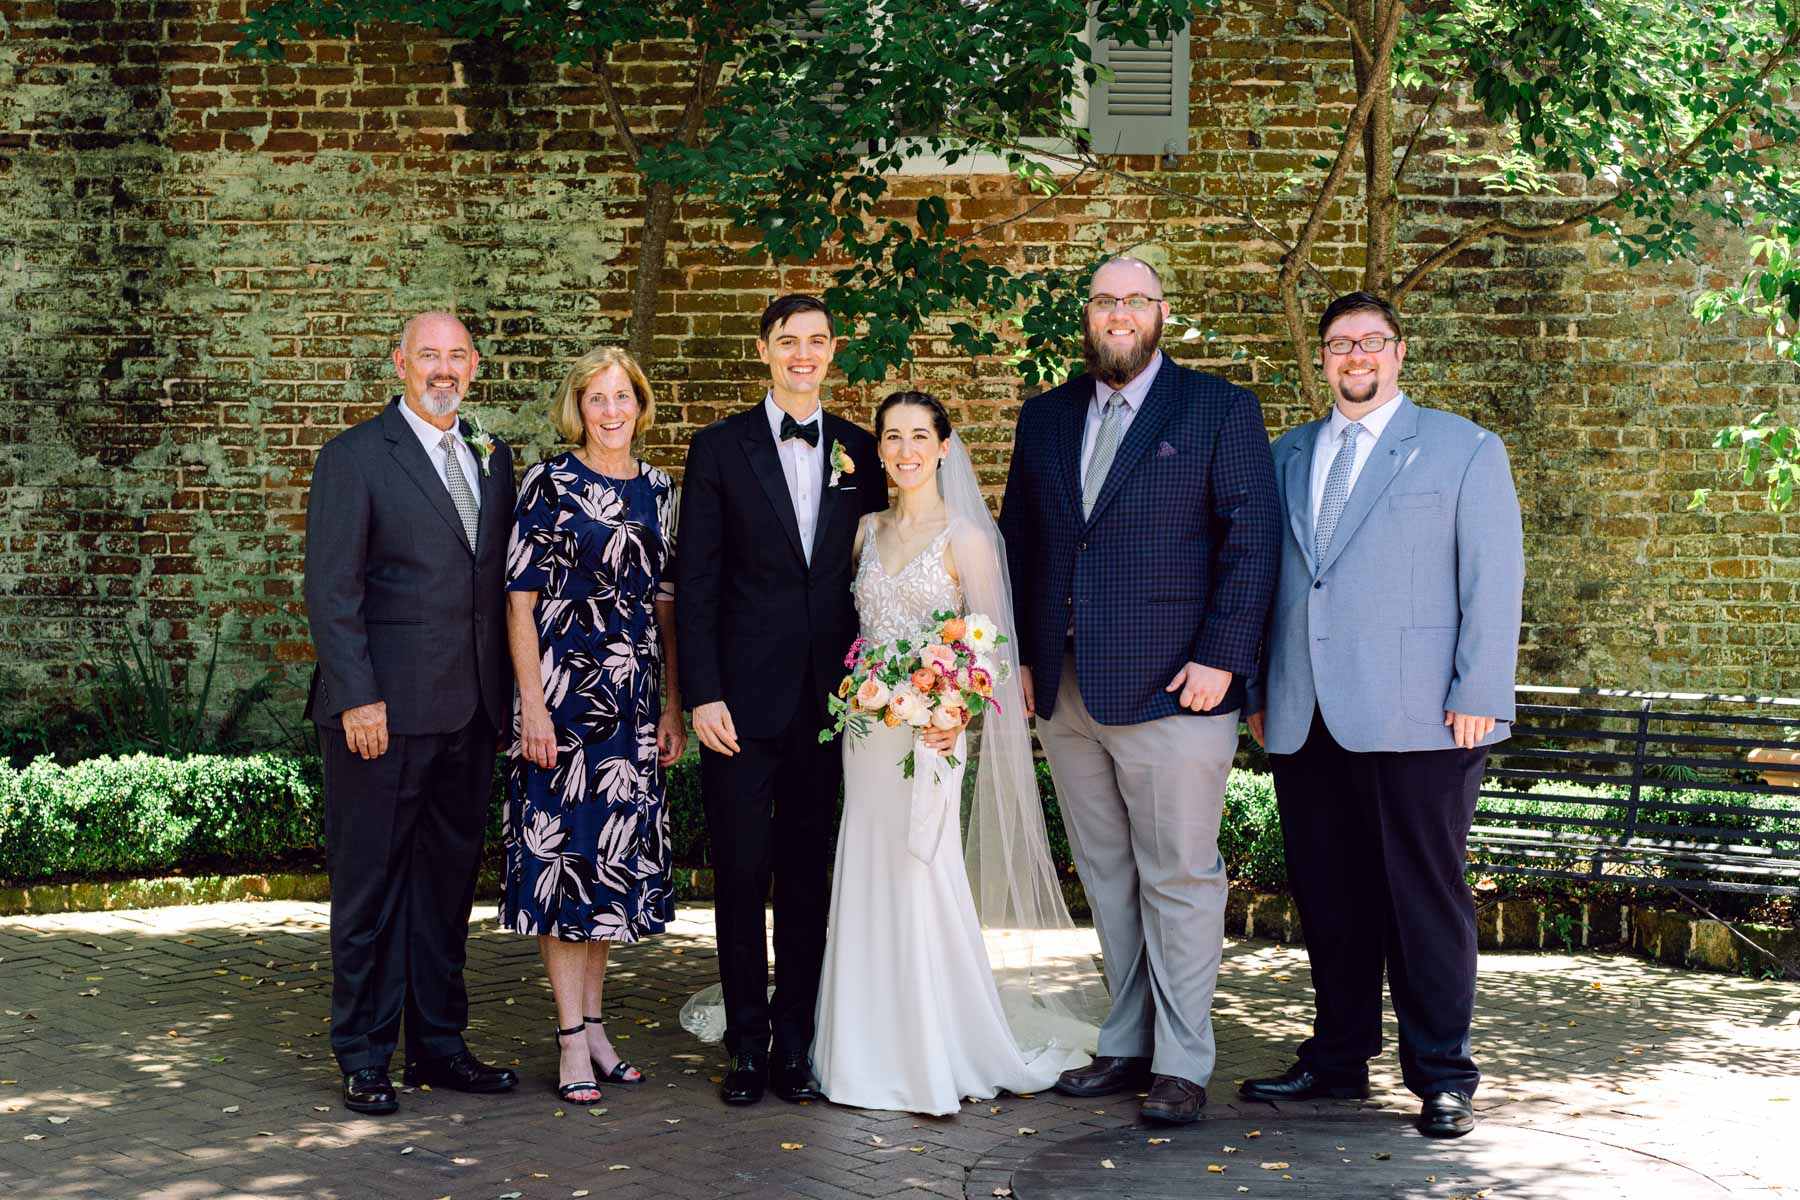 A family wedding portrait with the bride and groom